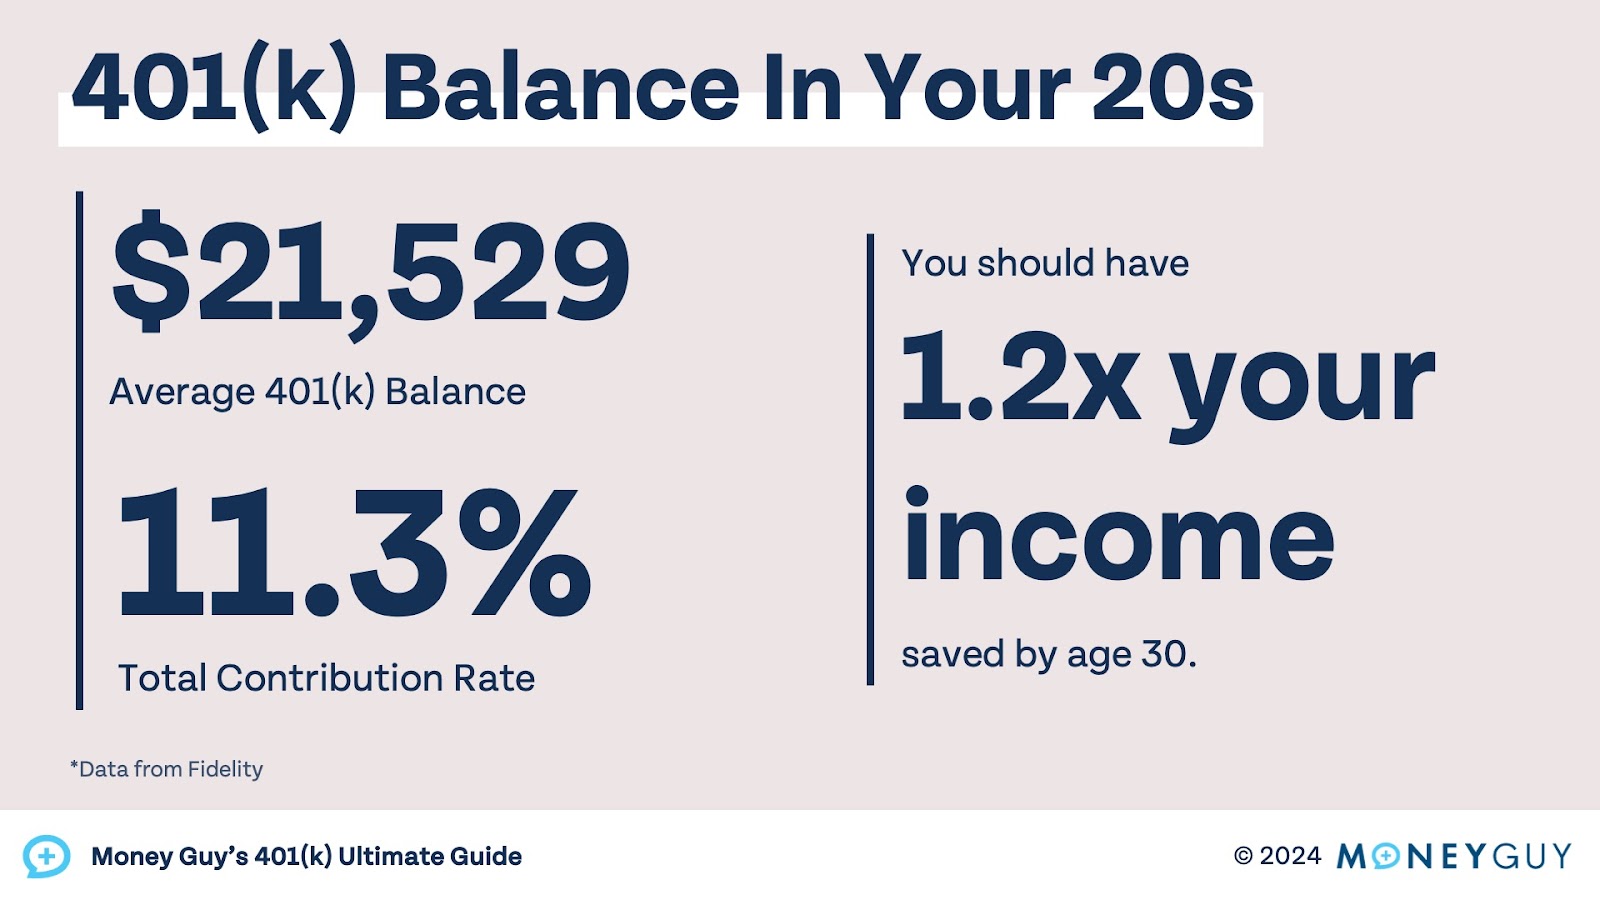 A chart showing the average 401(k) balance by age in your 20s.